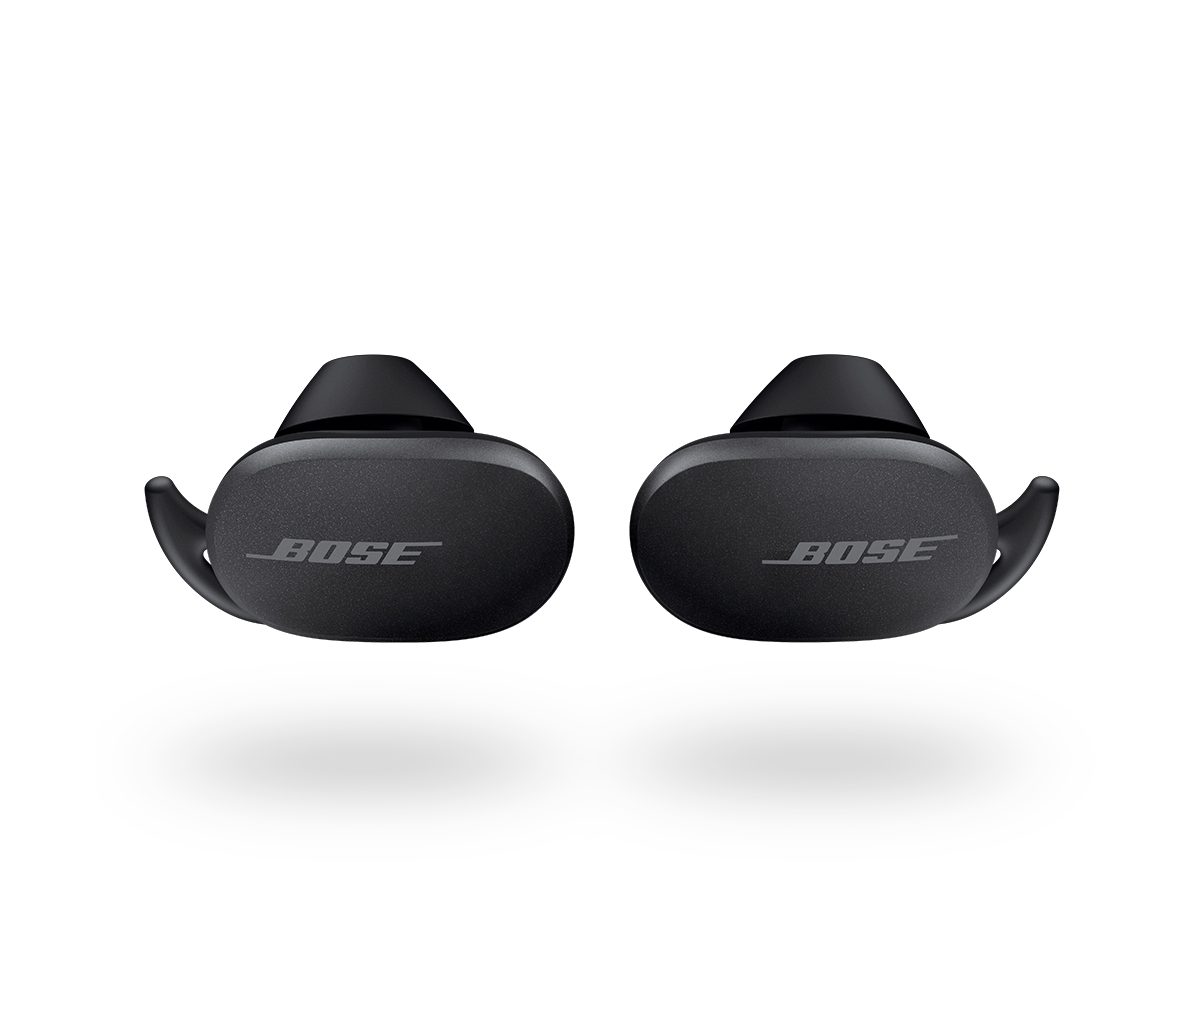 QuietComfort noise cancelling earbuds—Bose product support